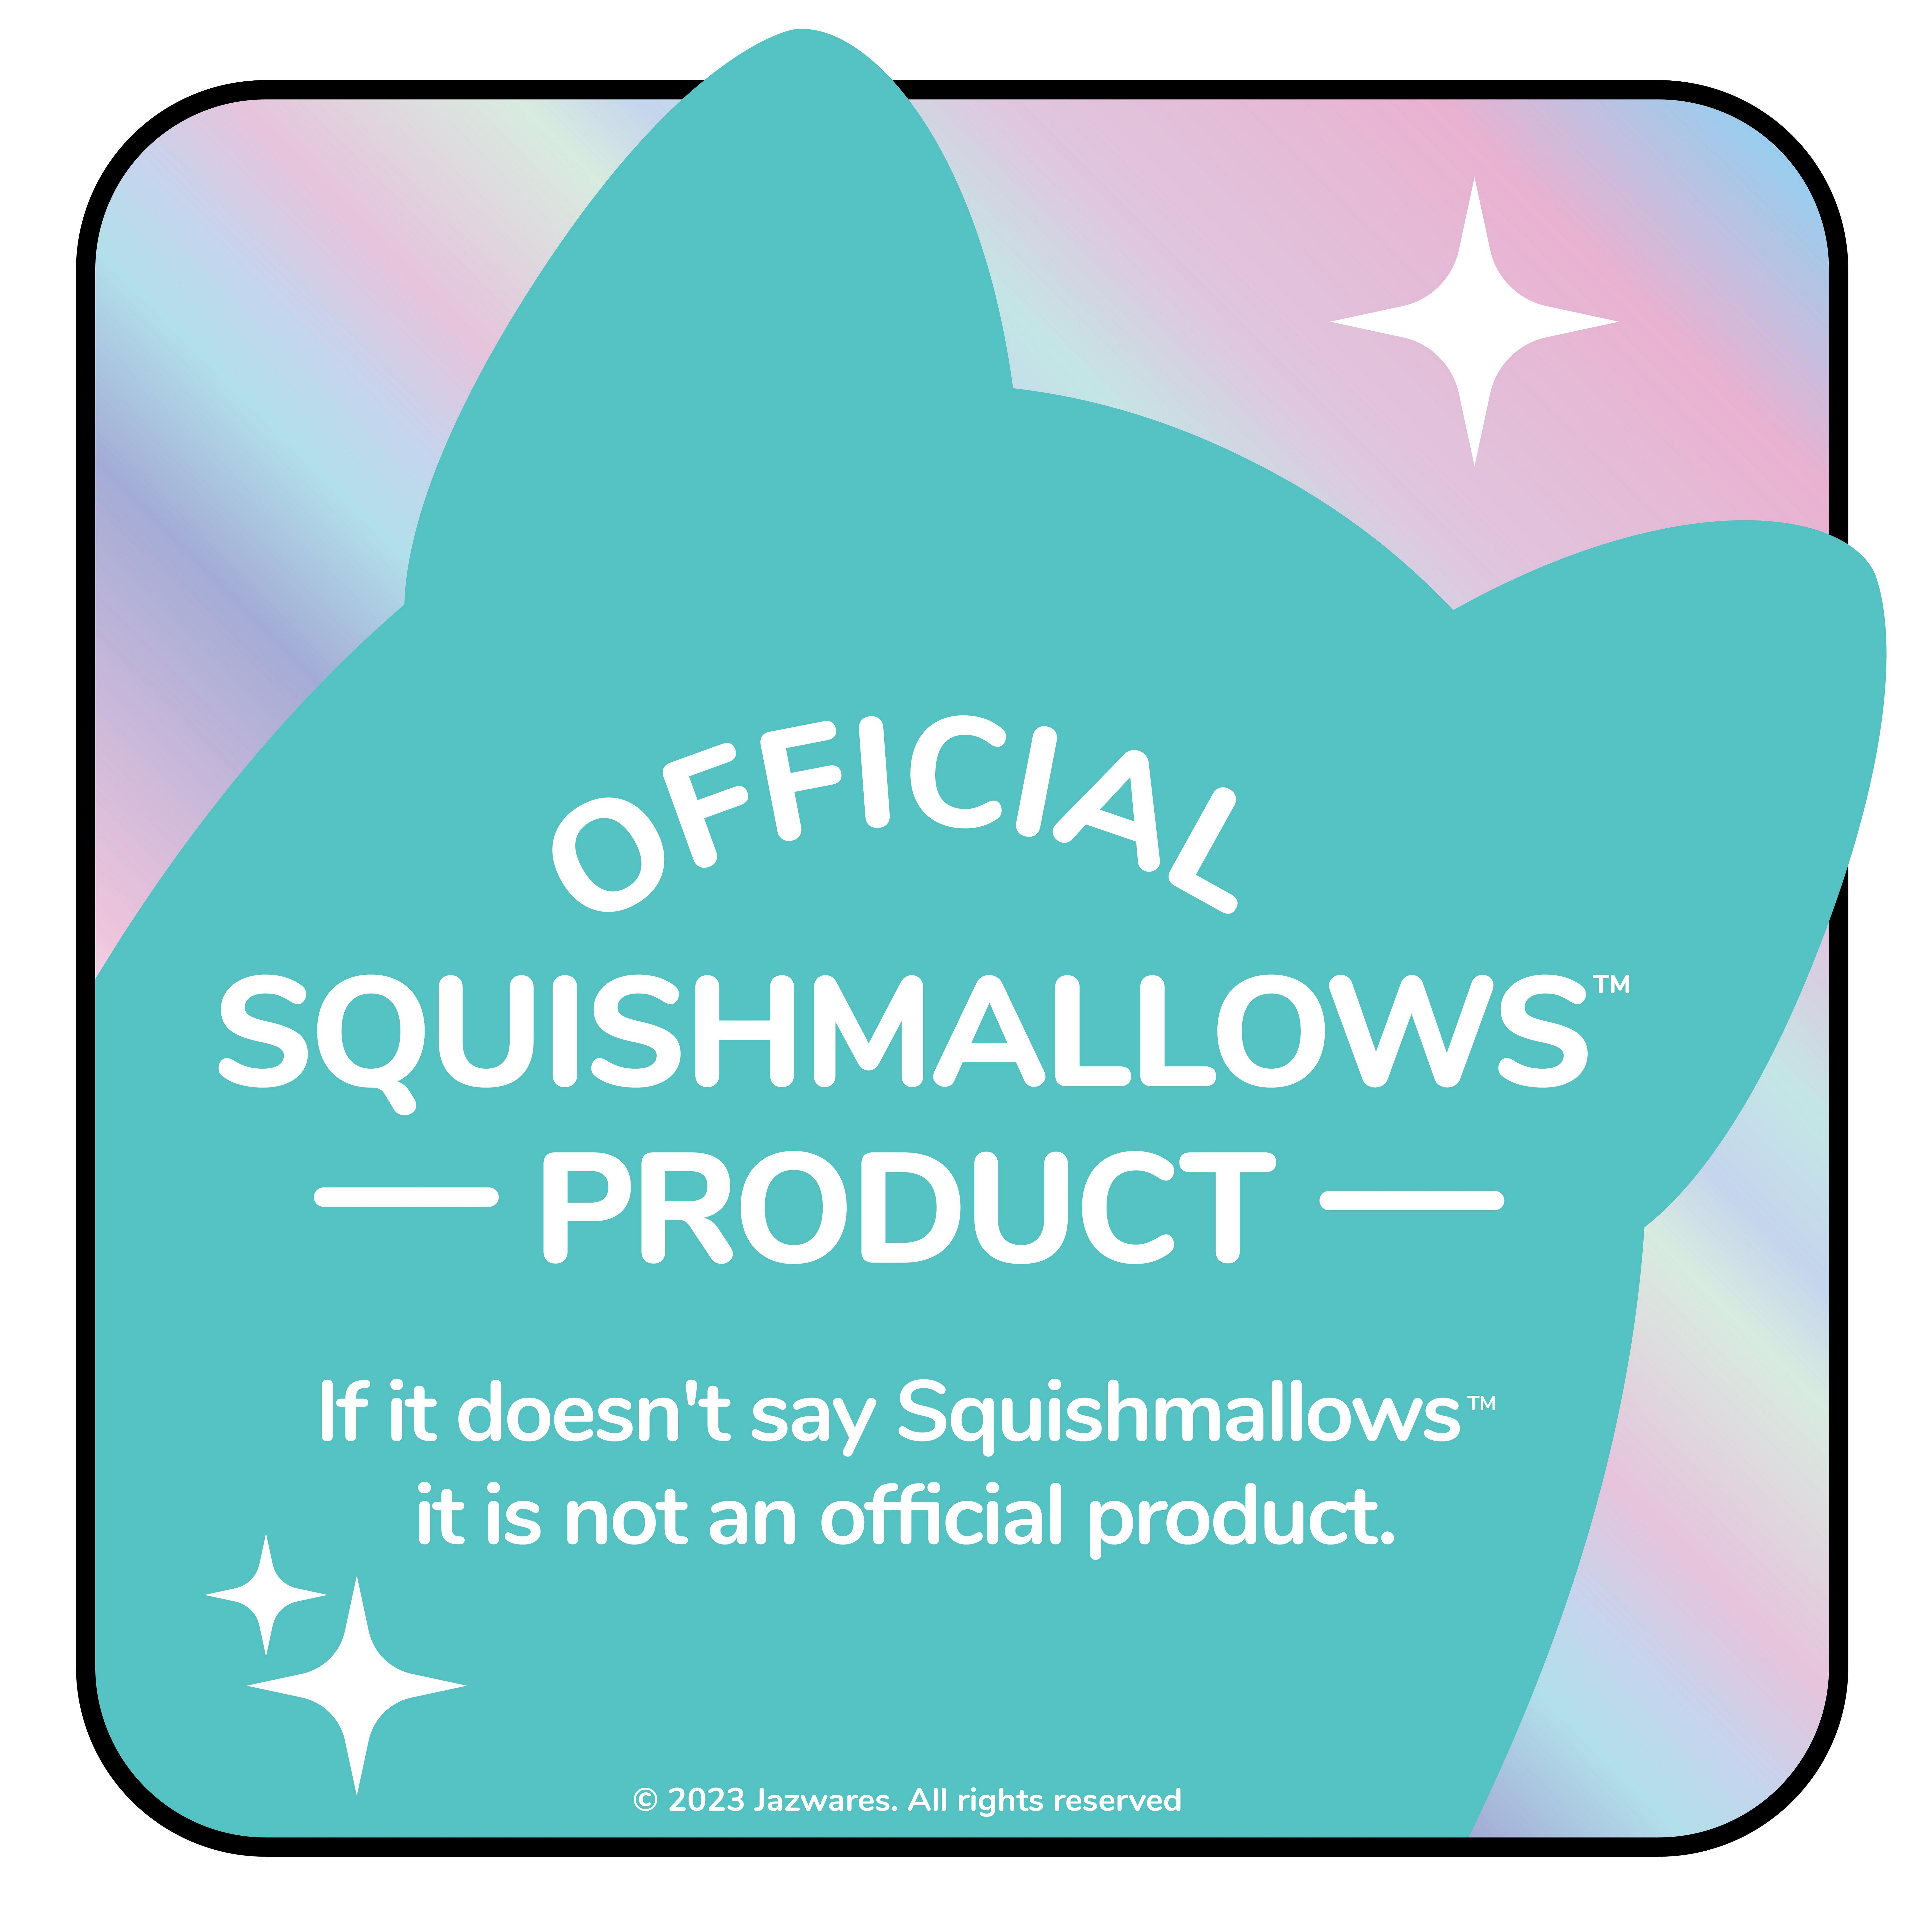  Squishville by The Original Squishmallows Holiday